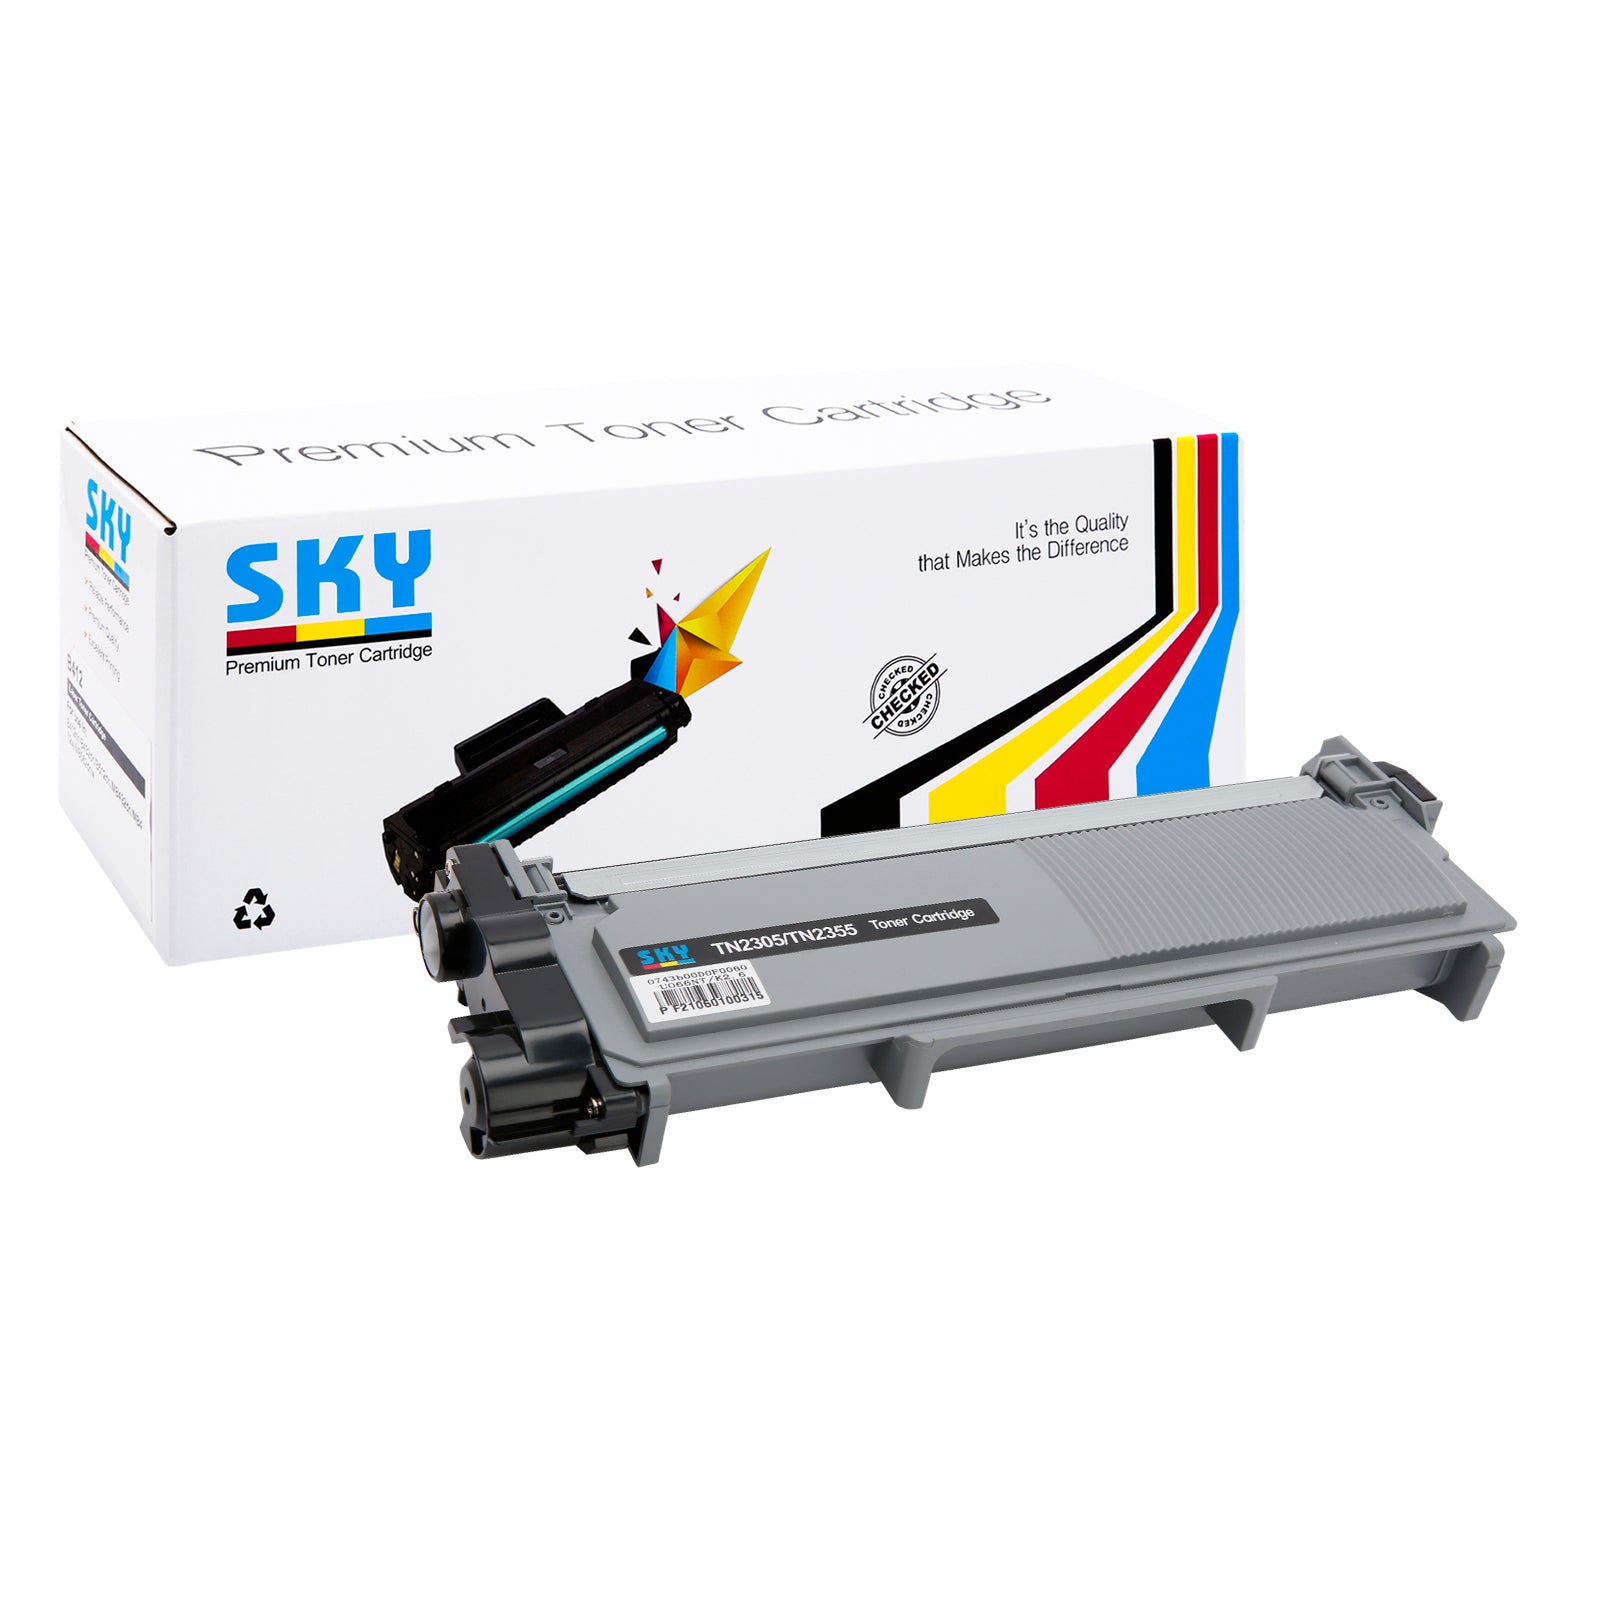 SKY TN-2305 Compatible Cartridge for Brother HL-L2320D, HL-L2365DW  MFC-L2700D MFC-L2700DW  MFC-L2740DW